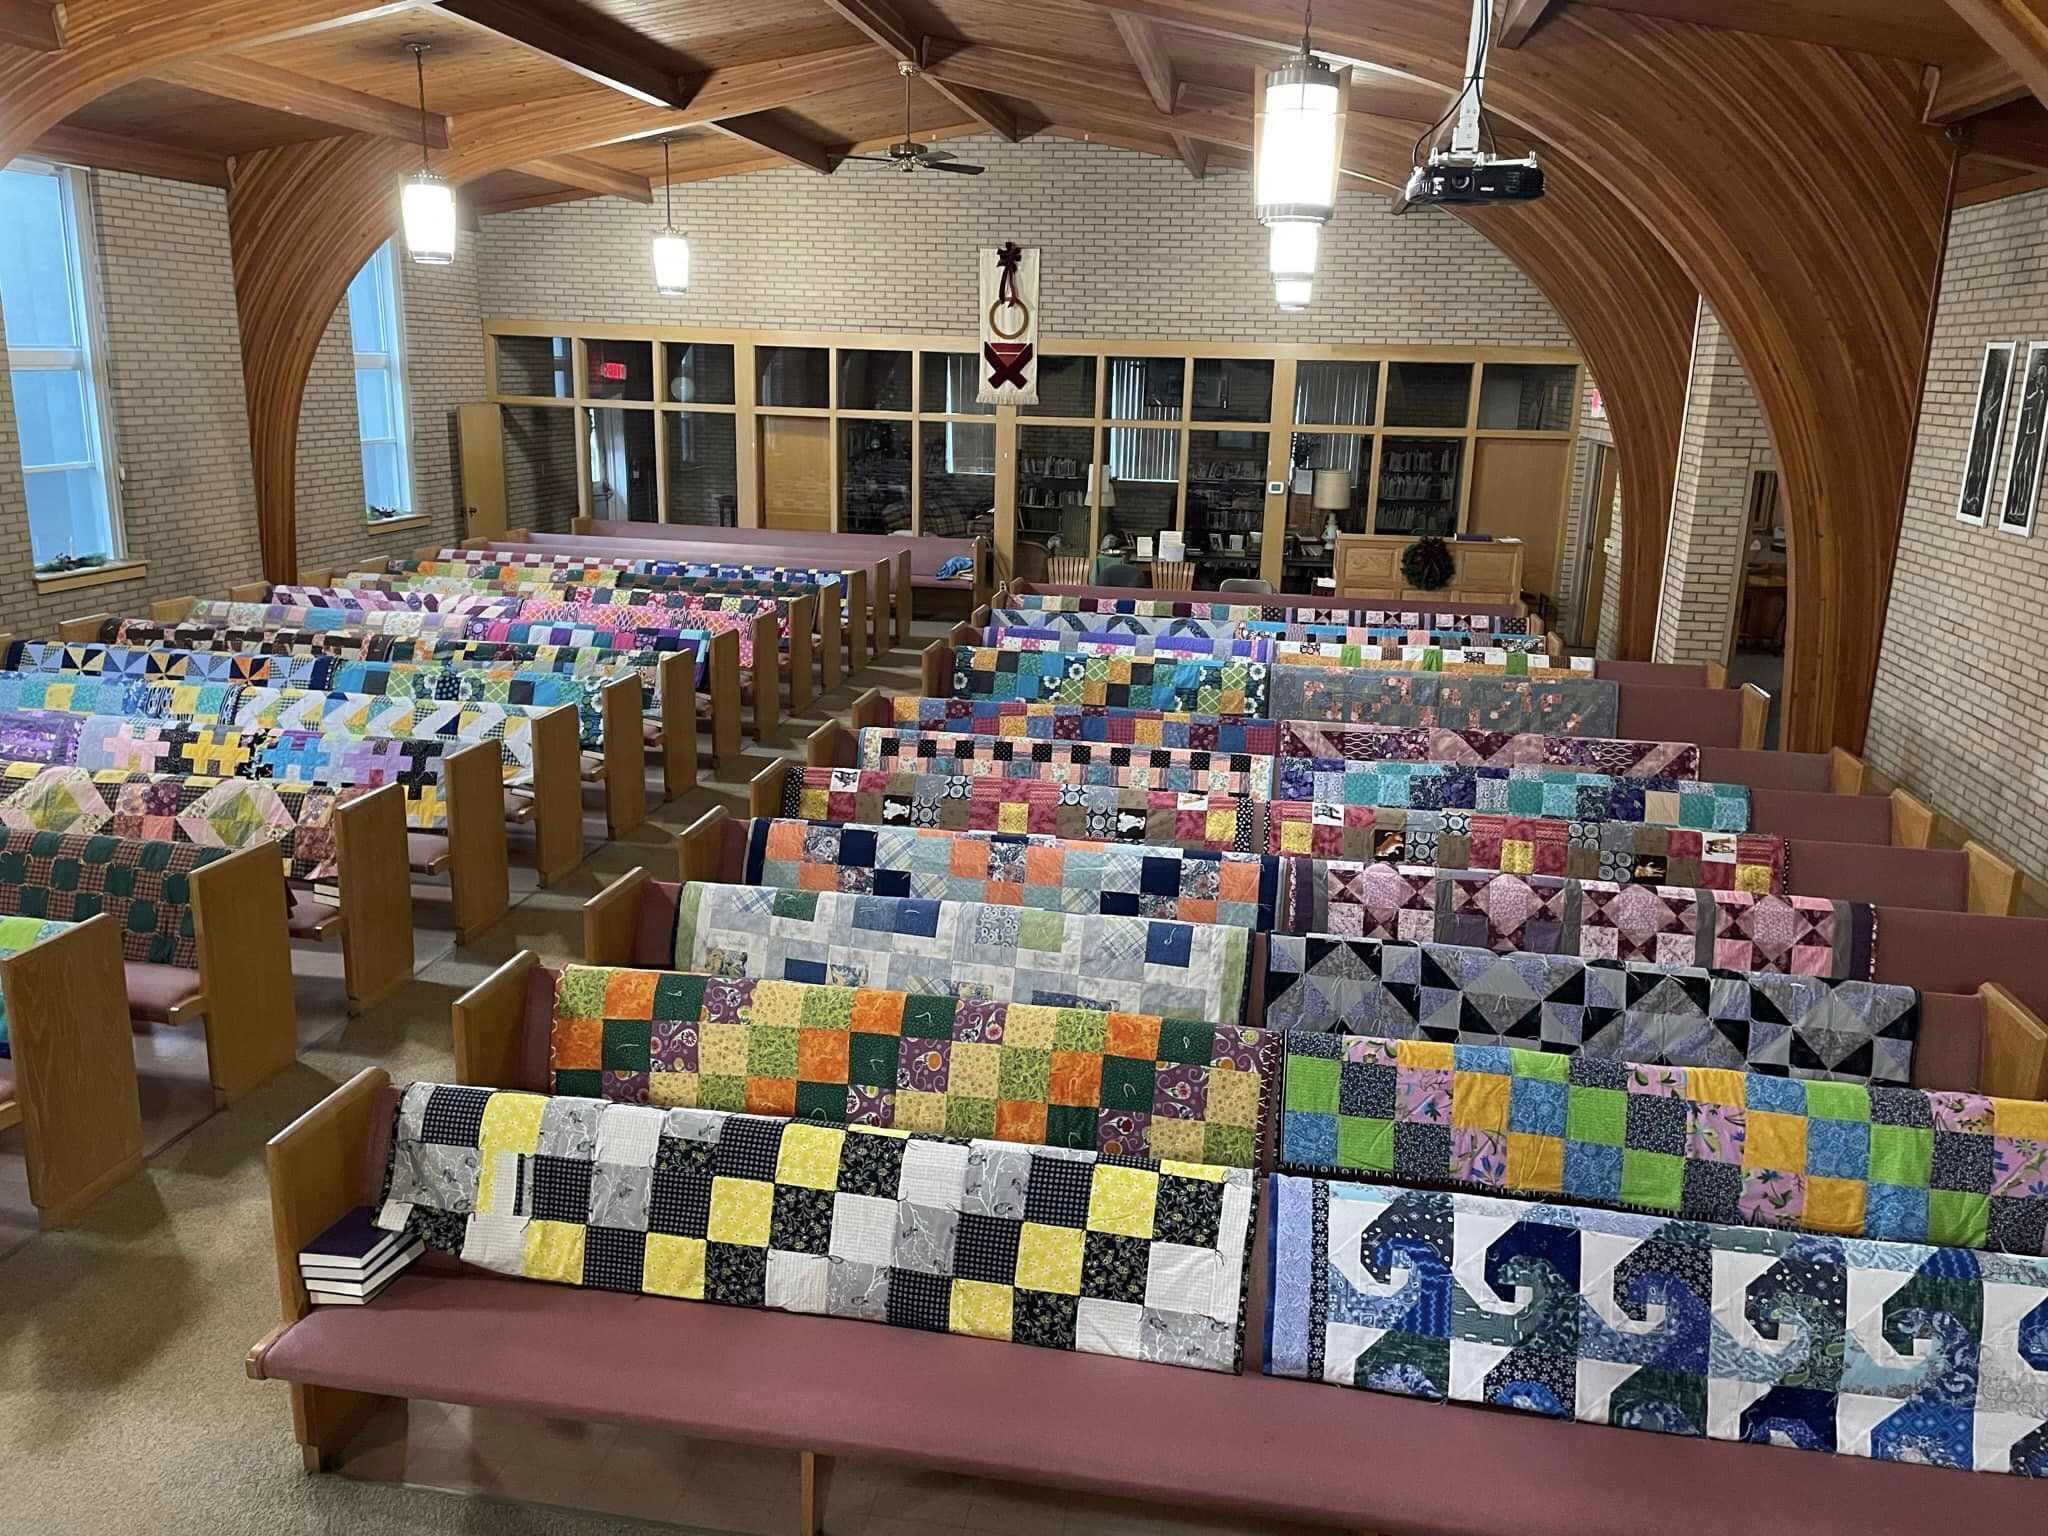 50 colorful comforters draped over church pews